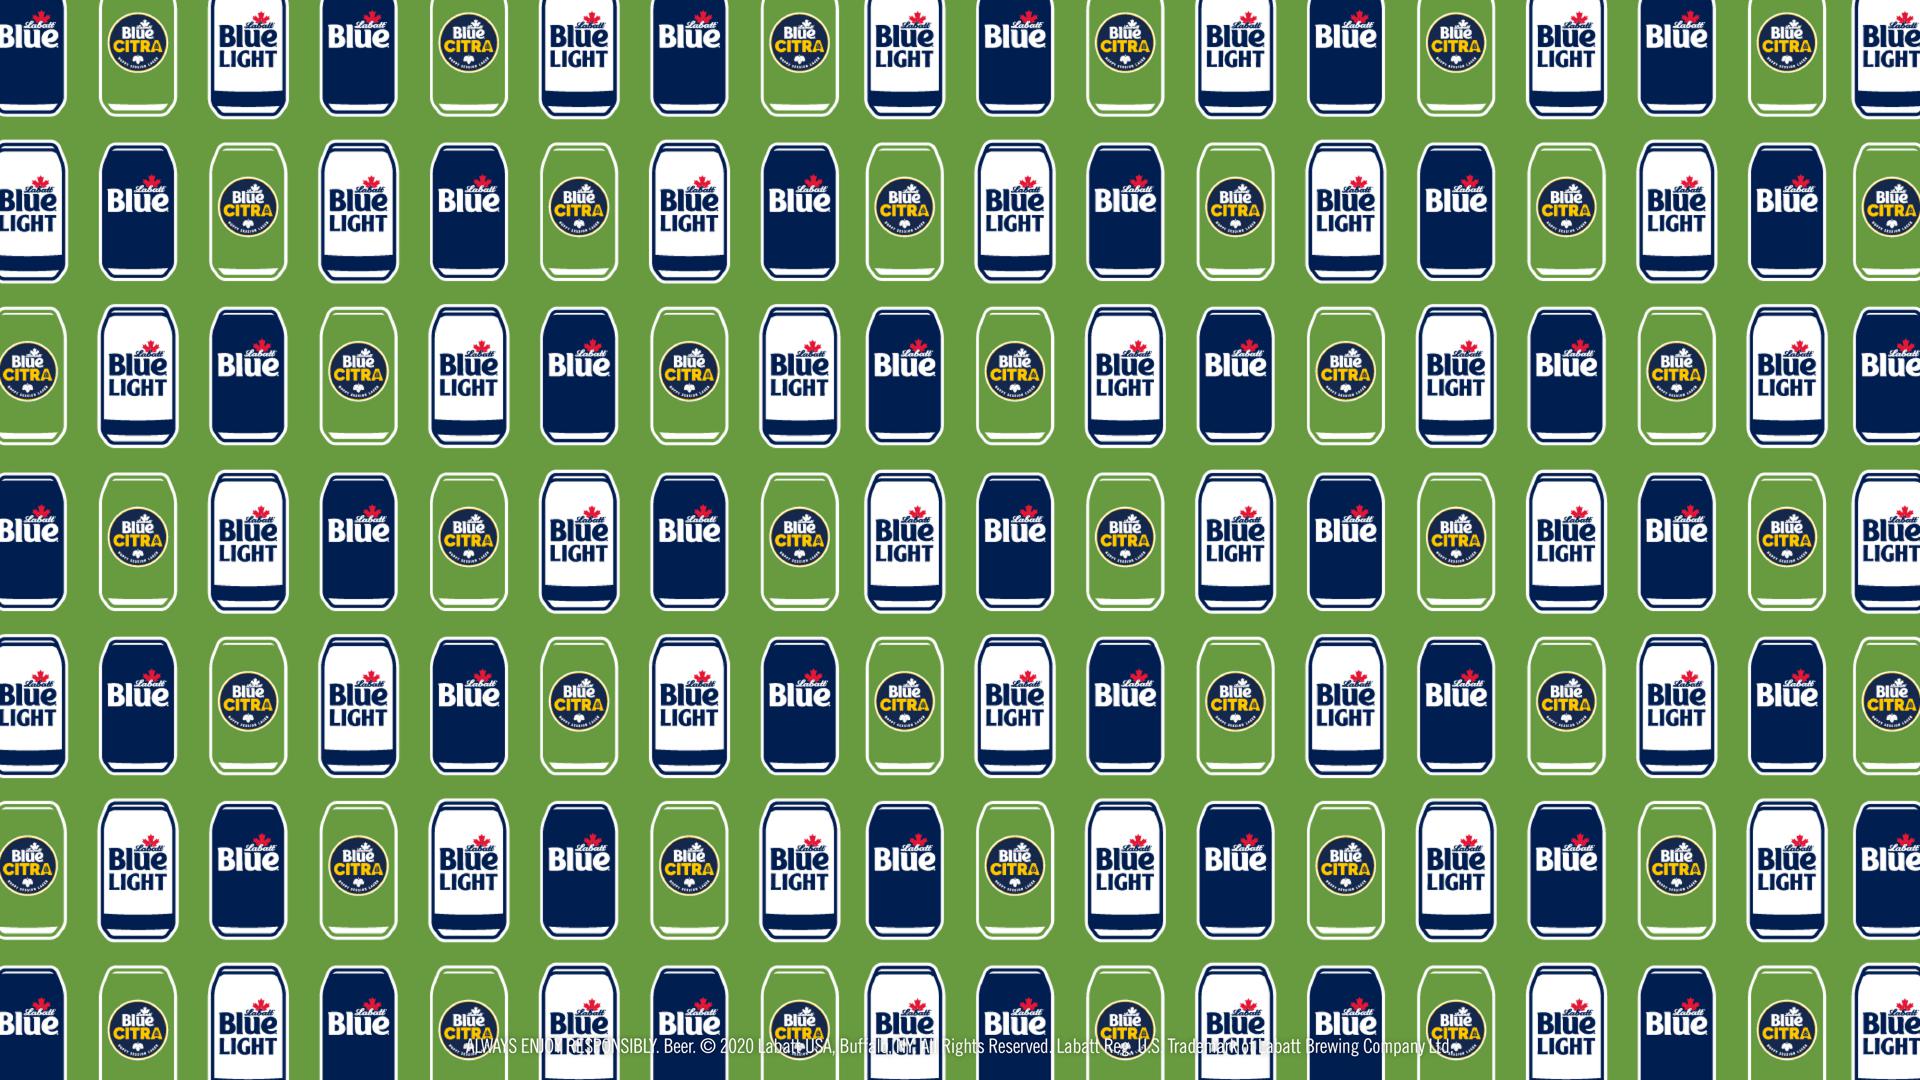 Blue, Blue Light, and Blue Citra Cans Pattern Background